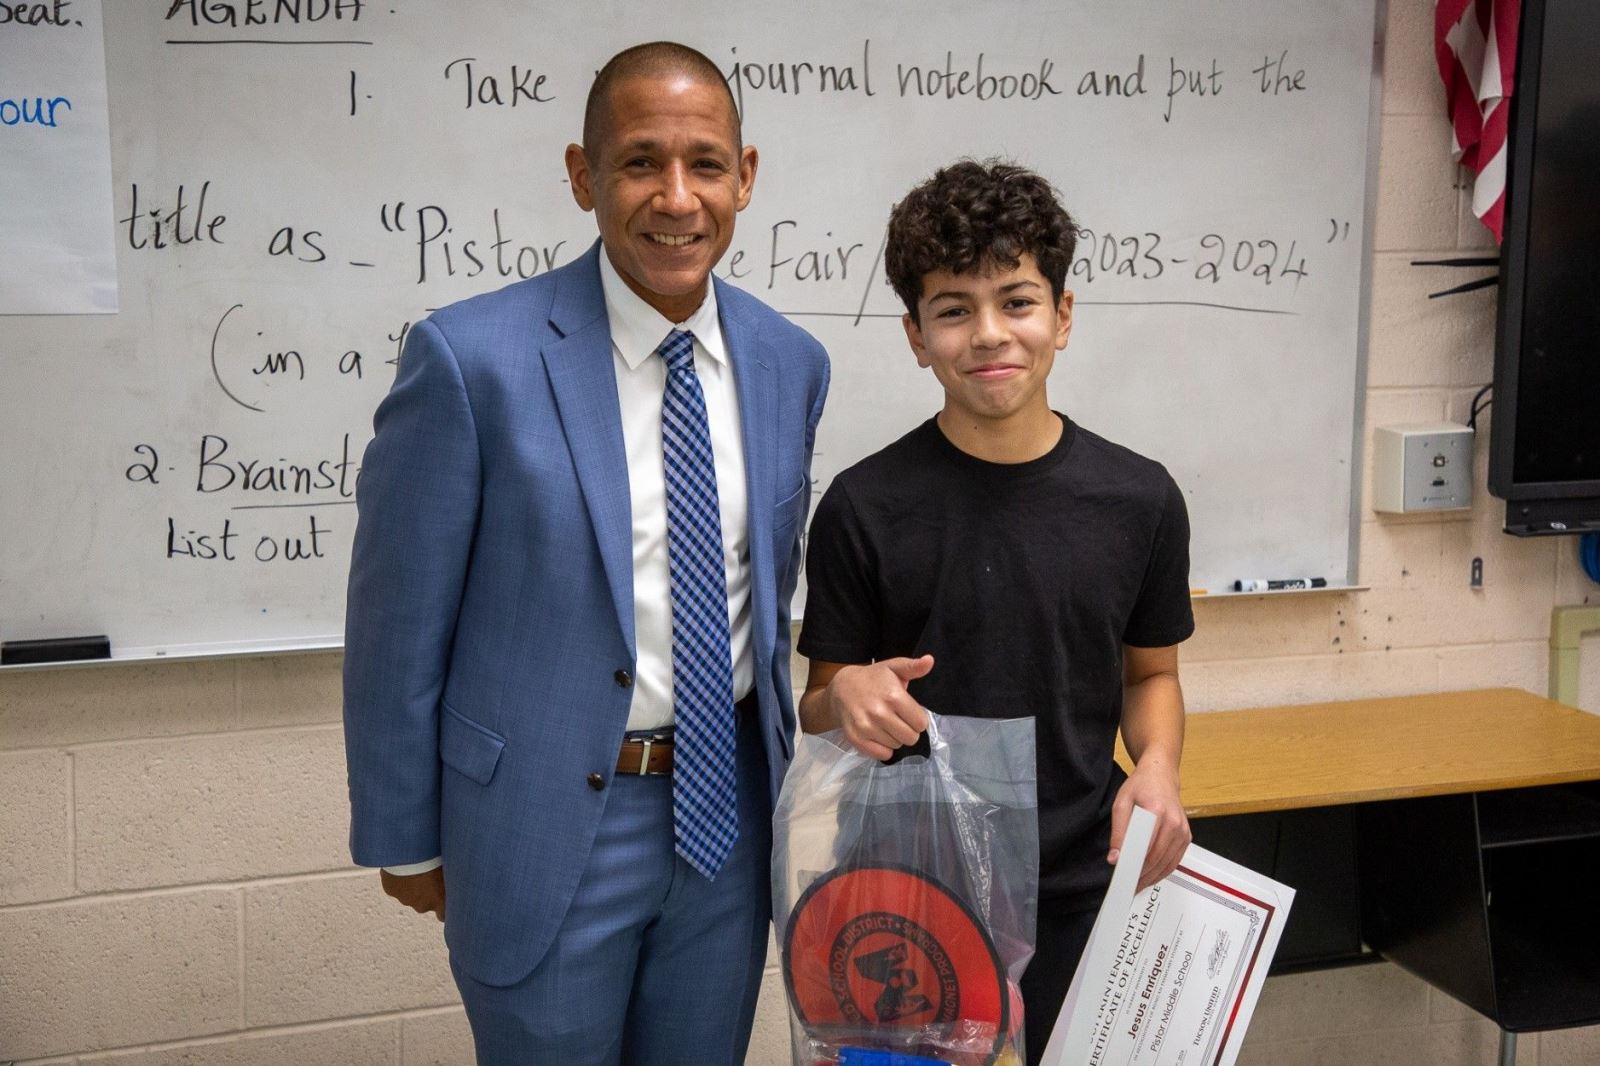 Dr. Trujillo smiles next to one of the students who was awarded the Superintendent's Certificate of Excellence at Pistor Middle School